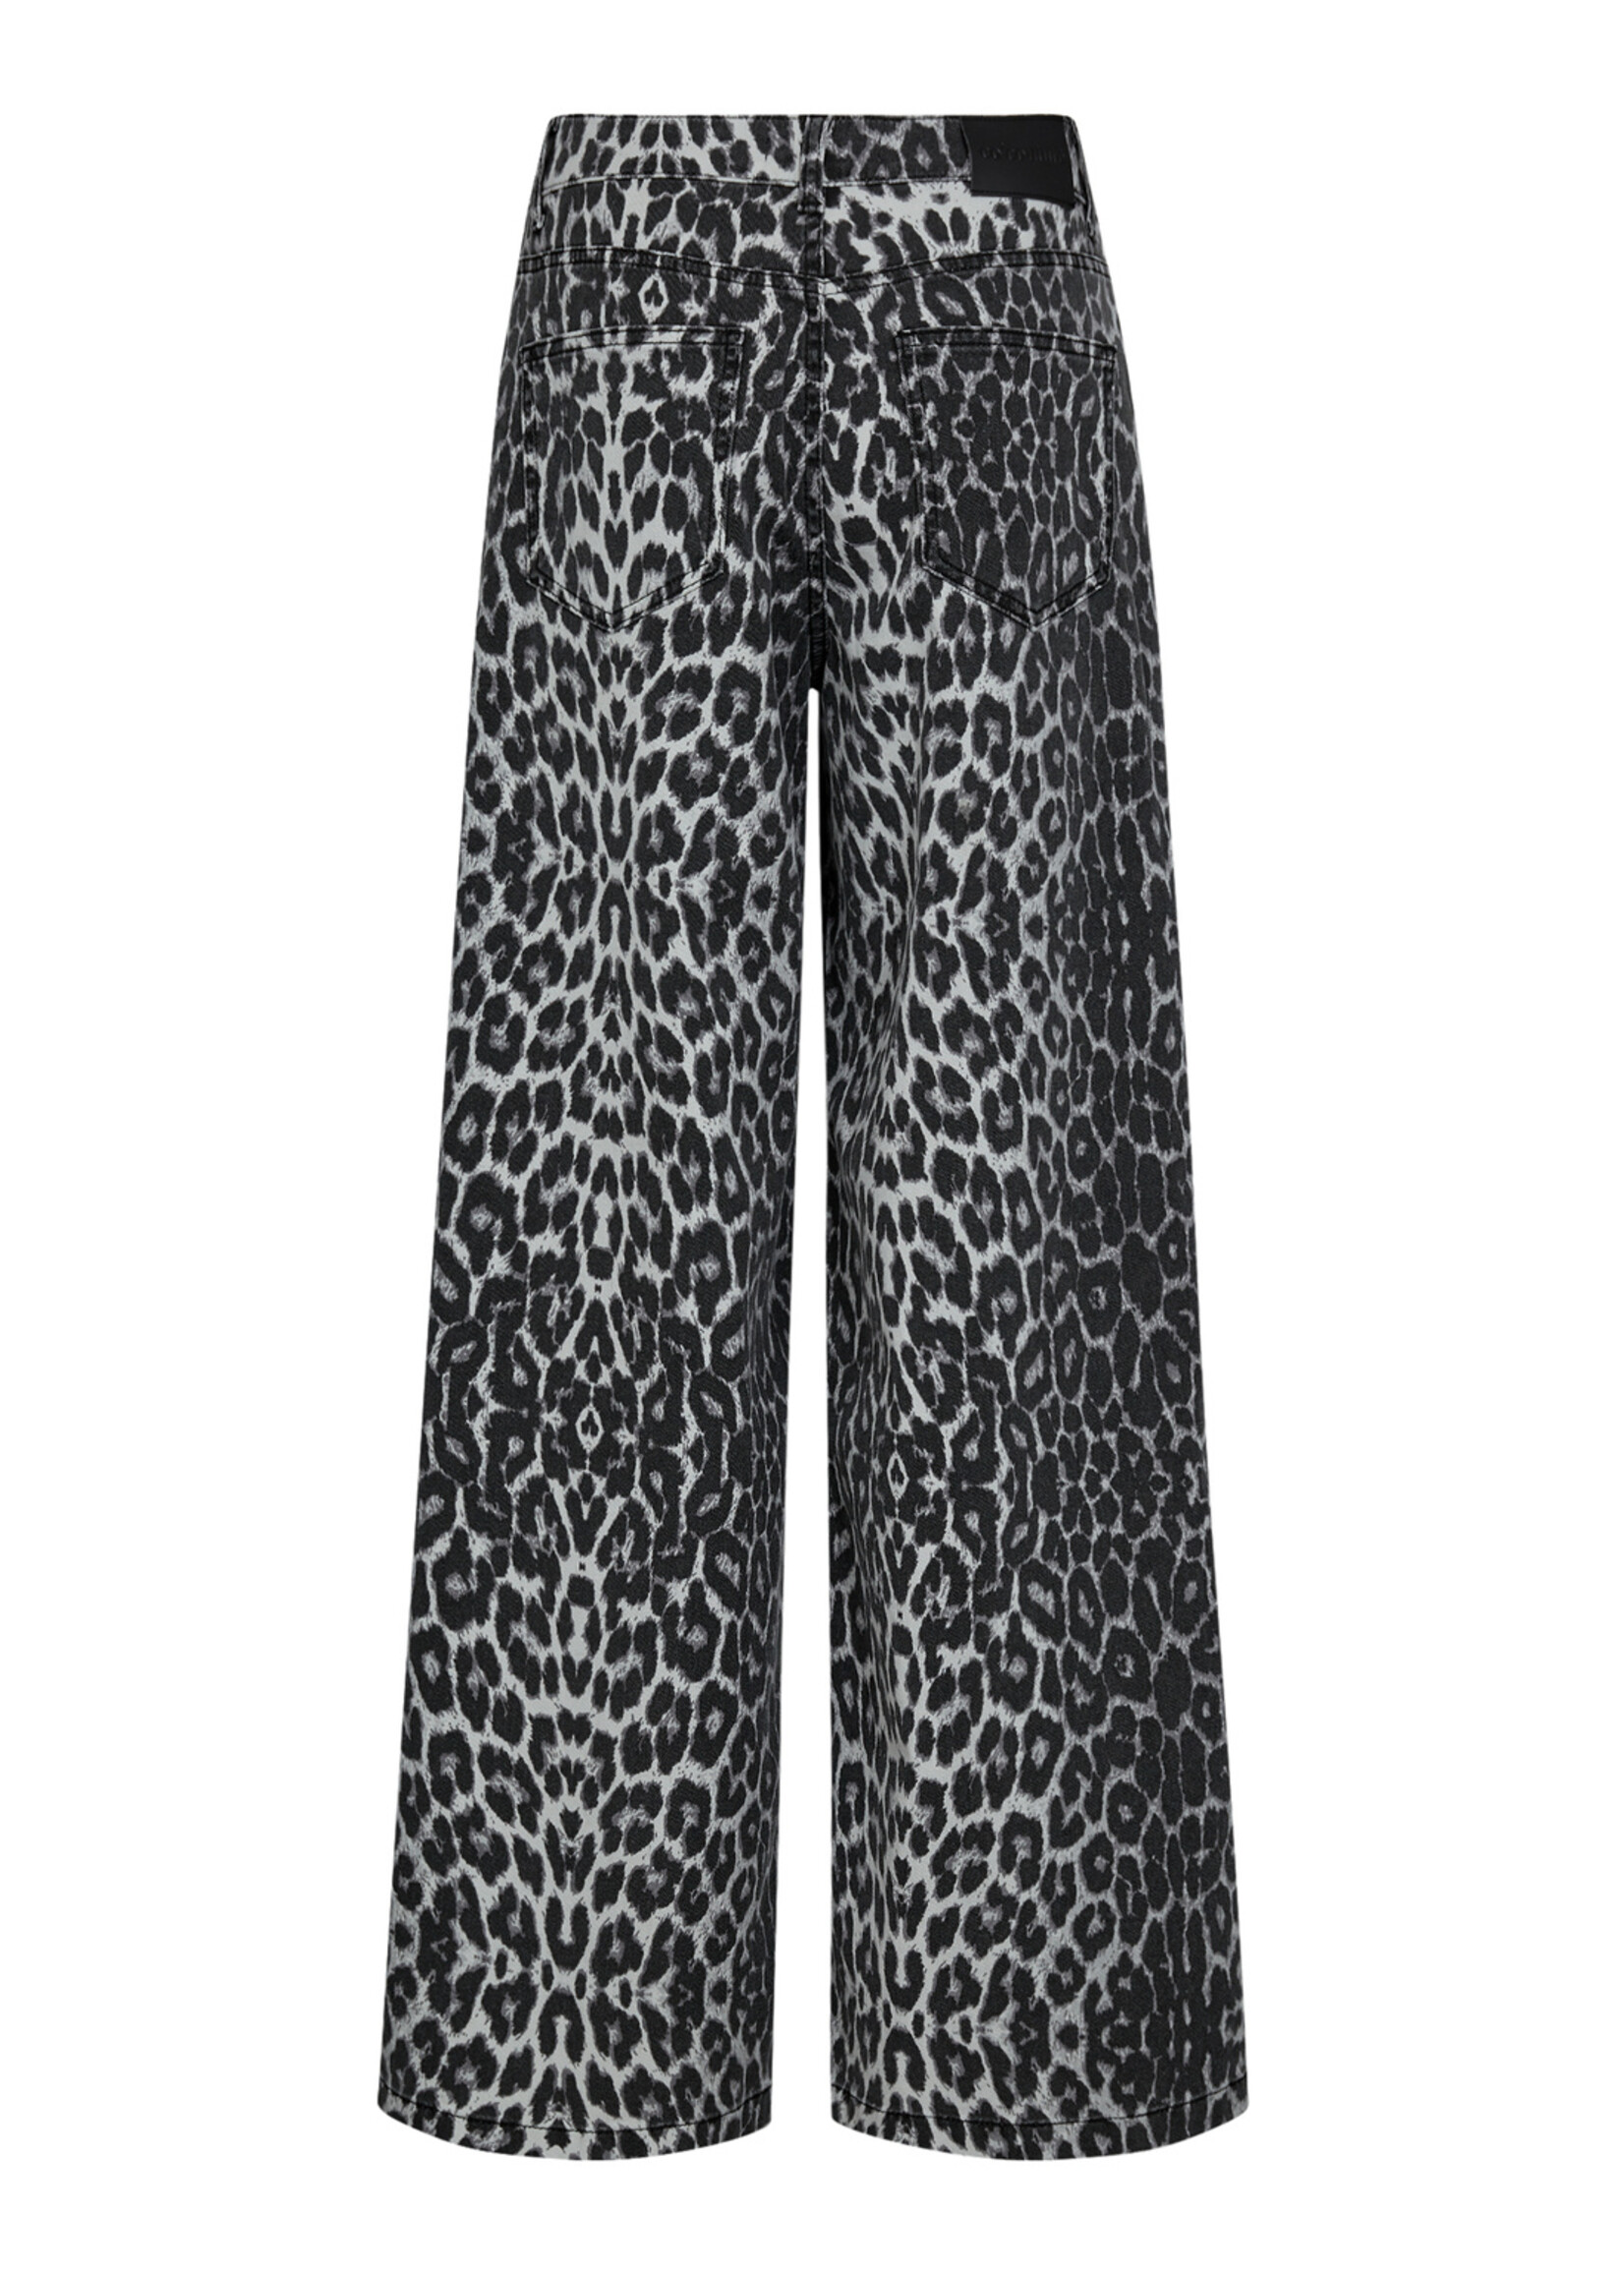 Co'Couture LeoCC Wide Long Pant - Dark Grey